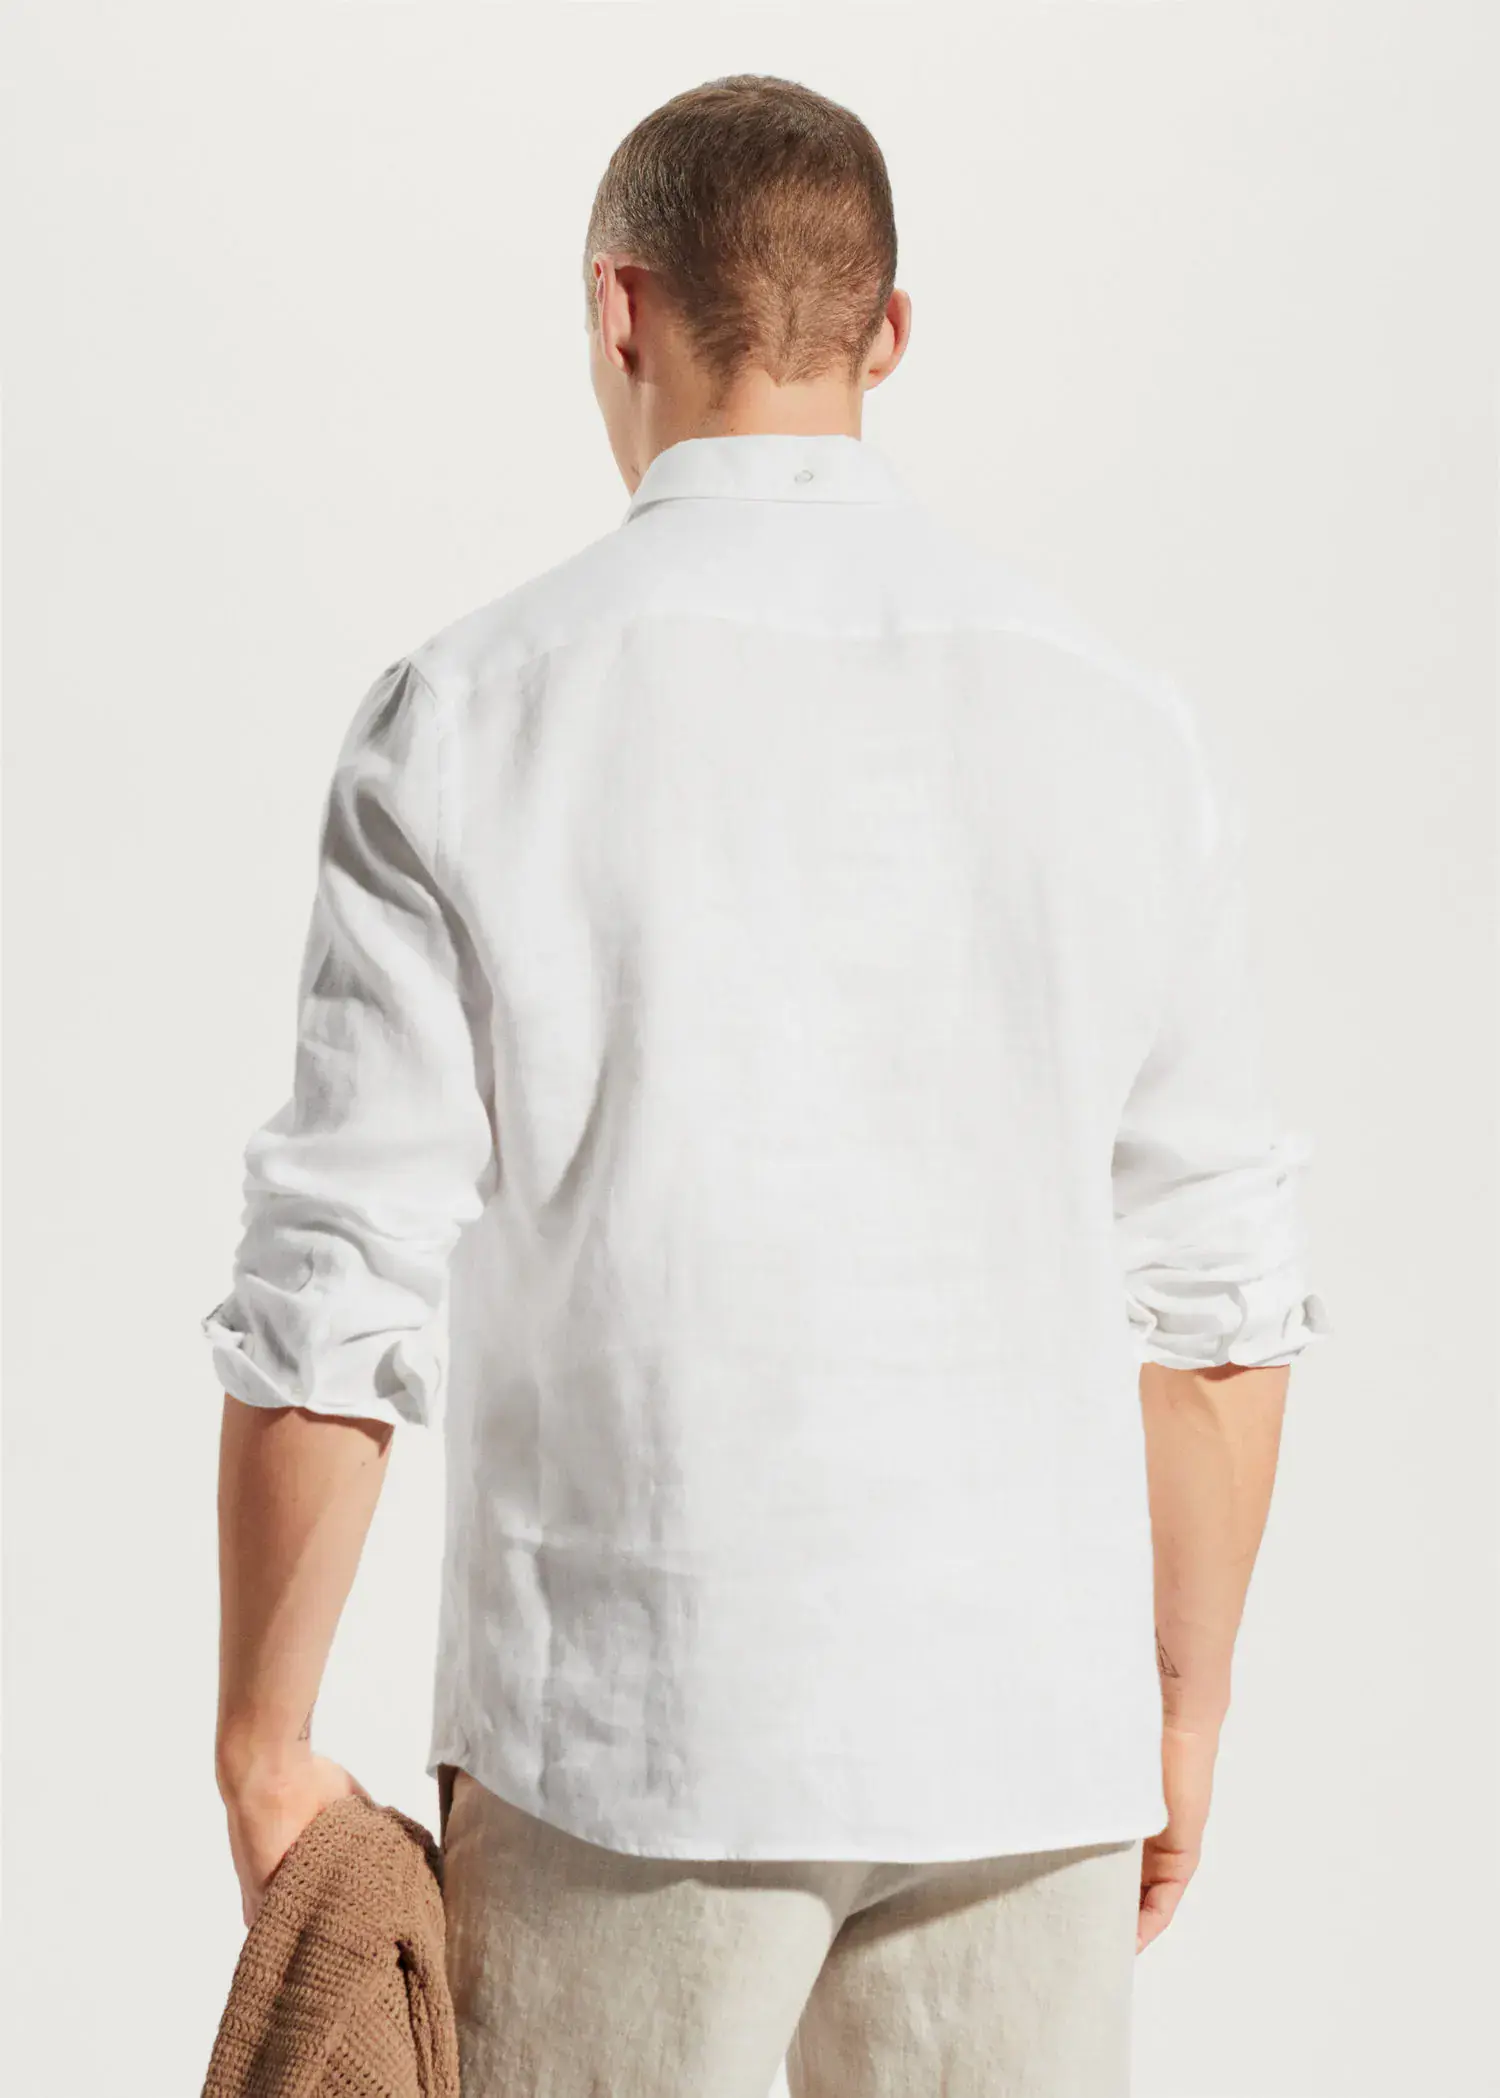 Mango 100% linen slim-fit shirt. a person wearing a white shirt and jeans. 